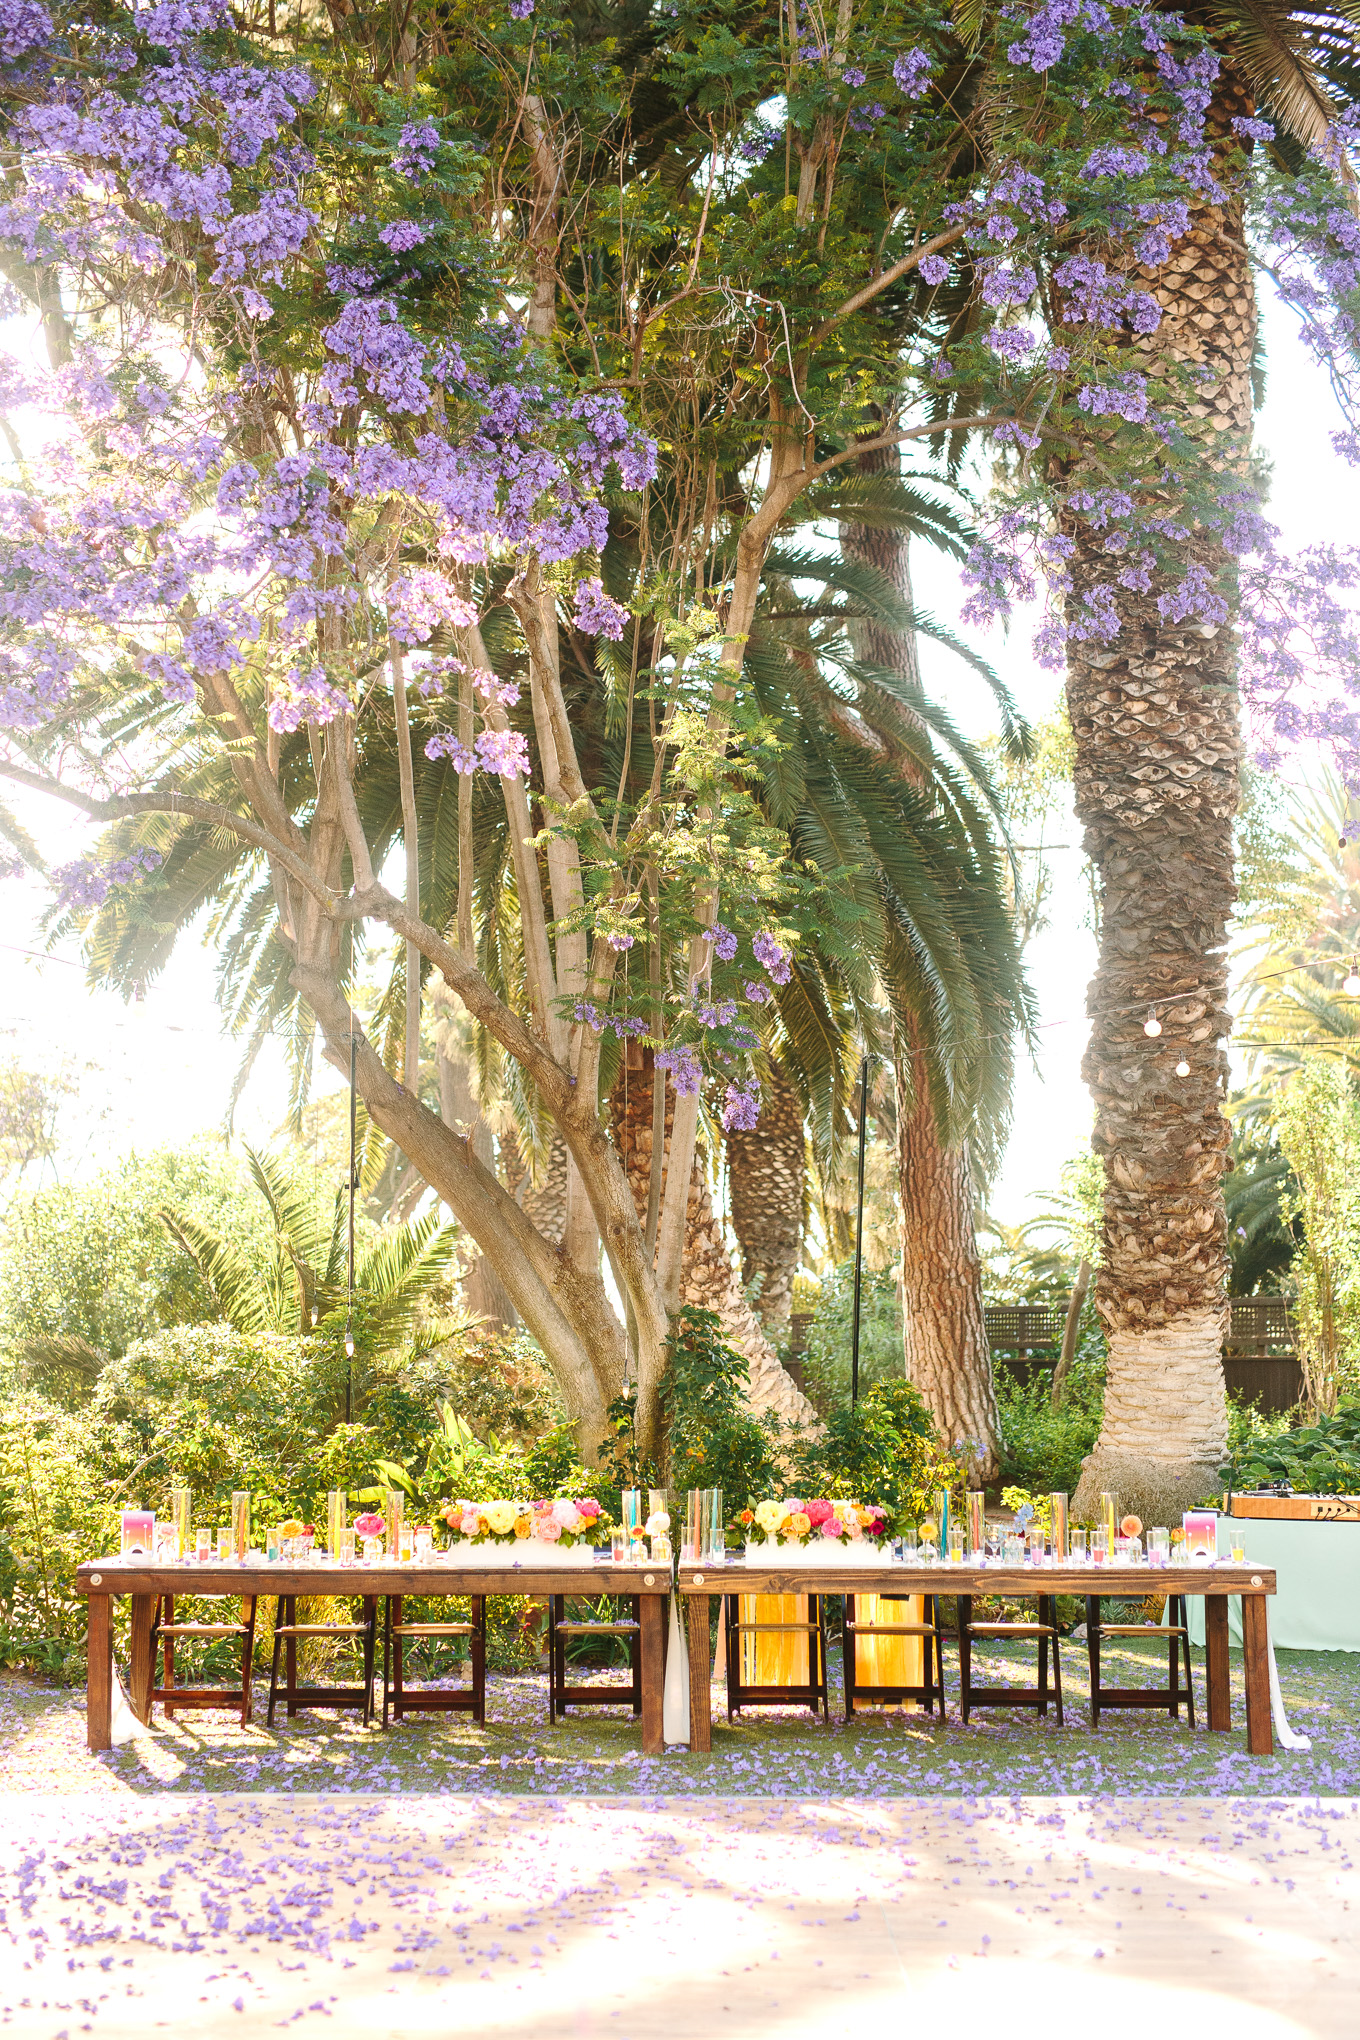 Colorful head table and blooming jacaranda trees at McCormick Home Ranch wedding | Best Southern California Garden Wedding Venues | Colorful and elevated wedding photography for fun-loving couples | #gardenvenue #weddingvenue #socalweddingvenue #bouquetideas #uniquebouquet   Source: Mary Costa Photography | Los Angeles 